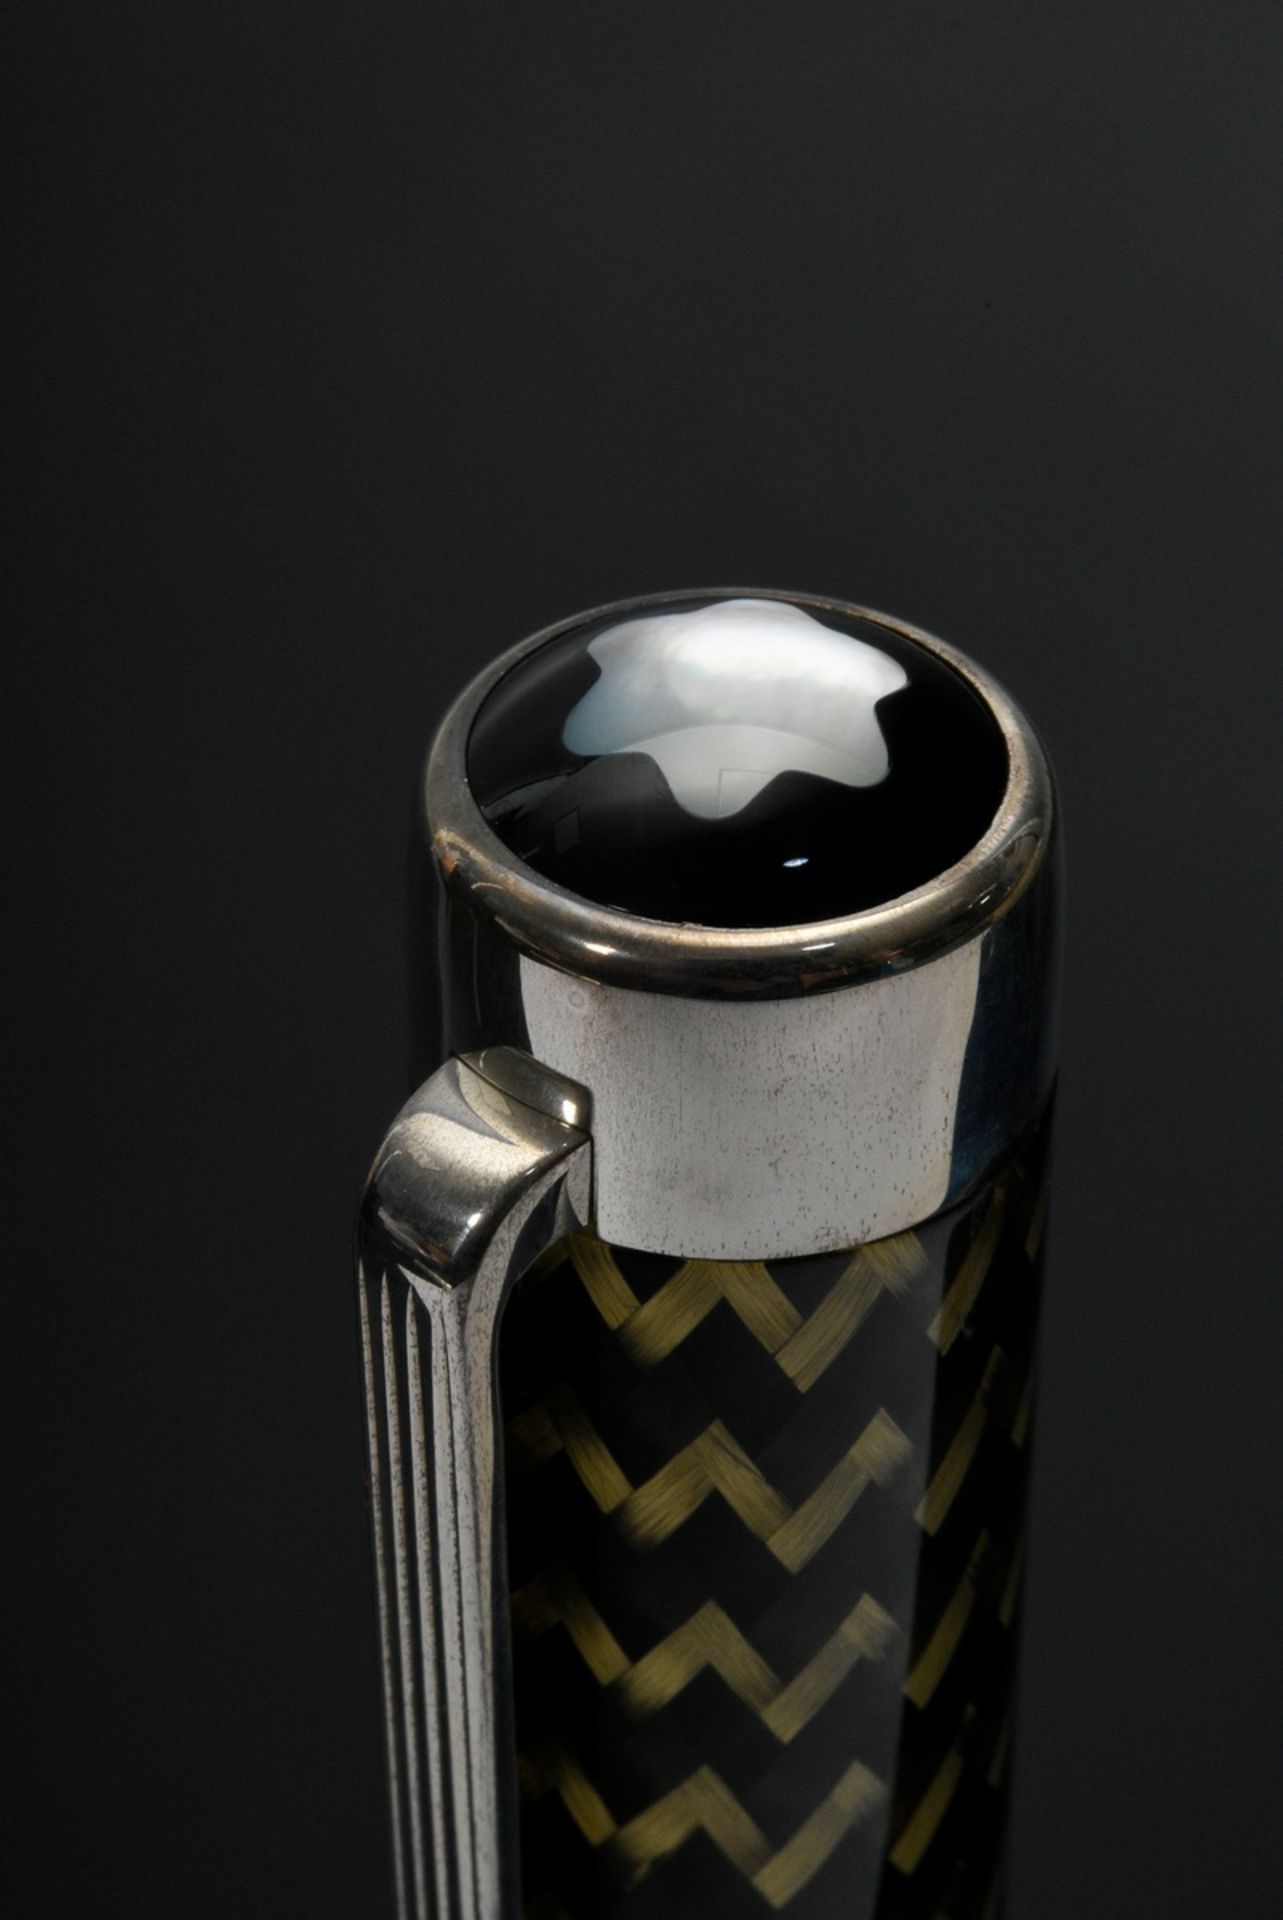 Montblanc piston fountain pen "Hommage à J. Pierpont Morgan" from the special edition "Patron of Ar - Image 5 of 6